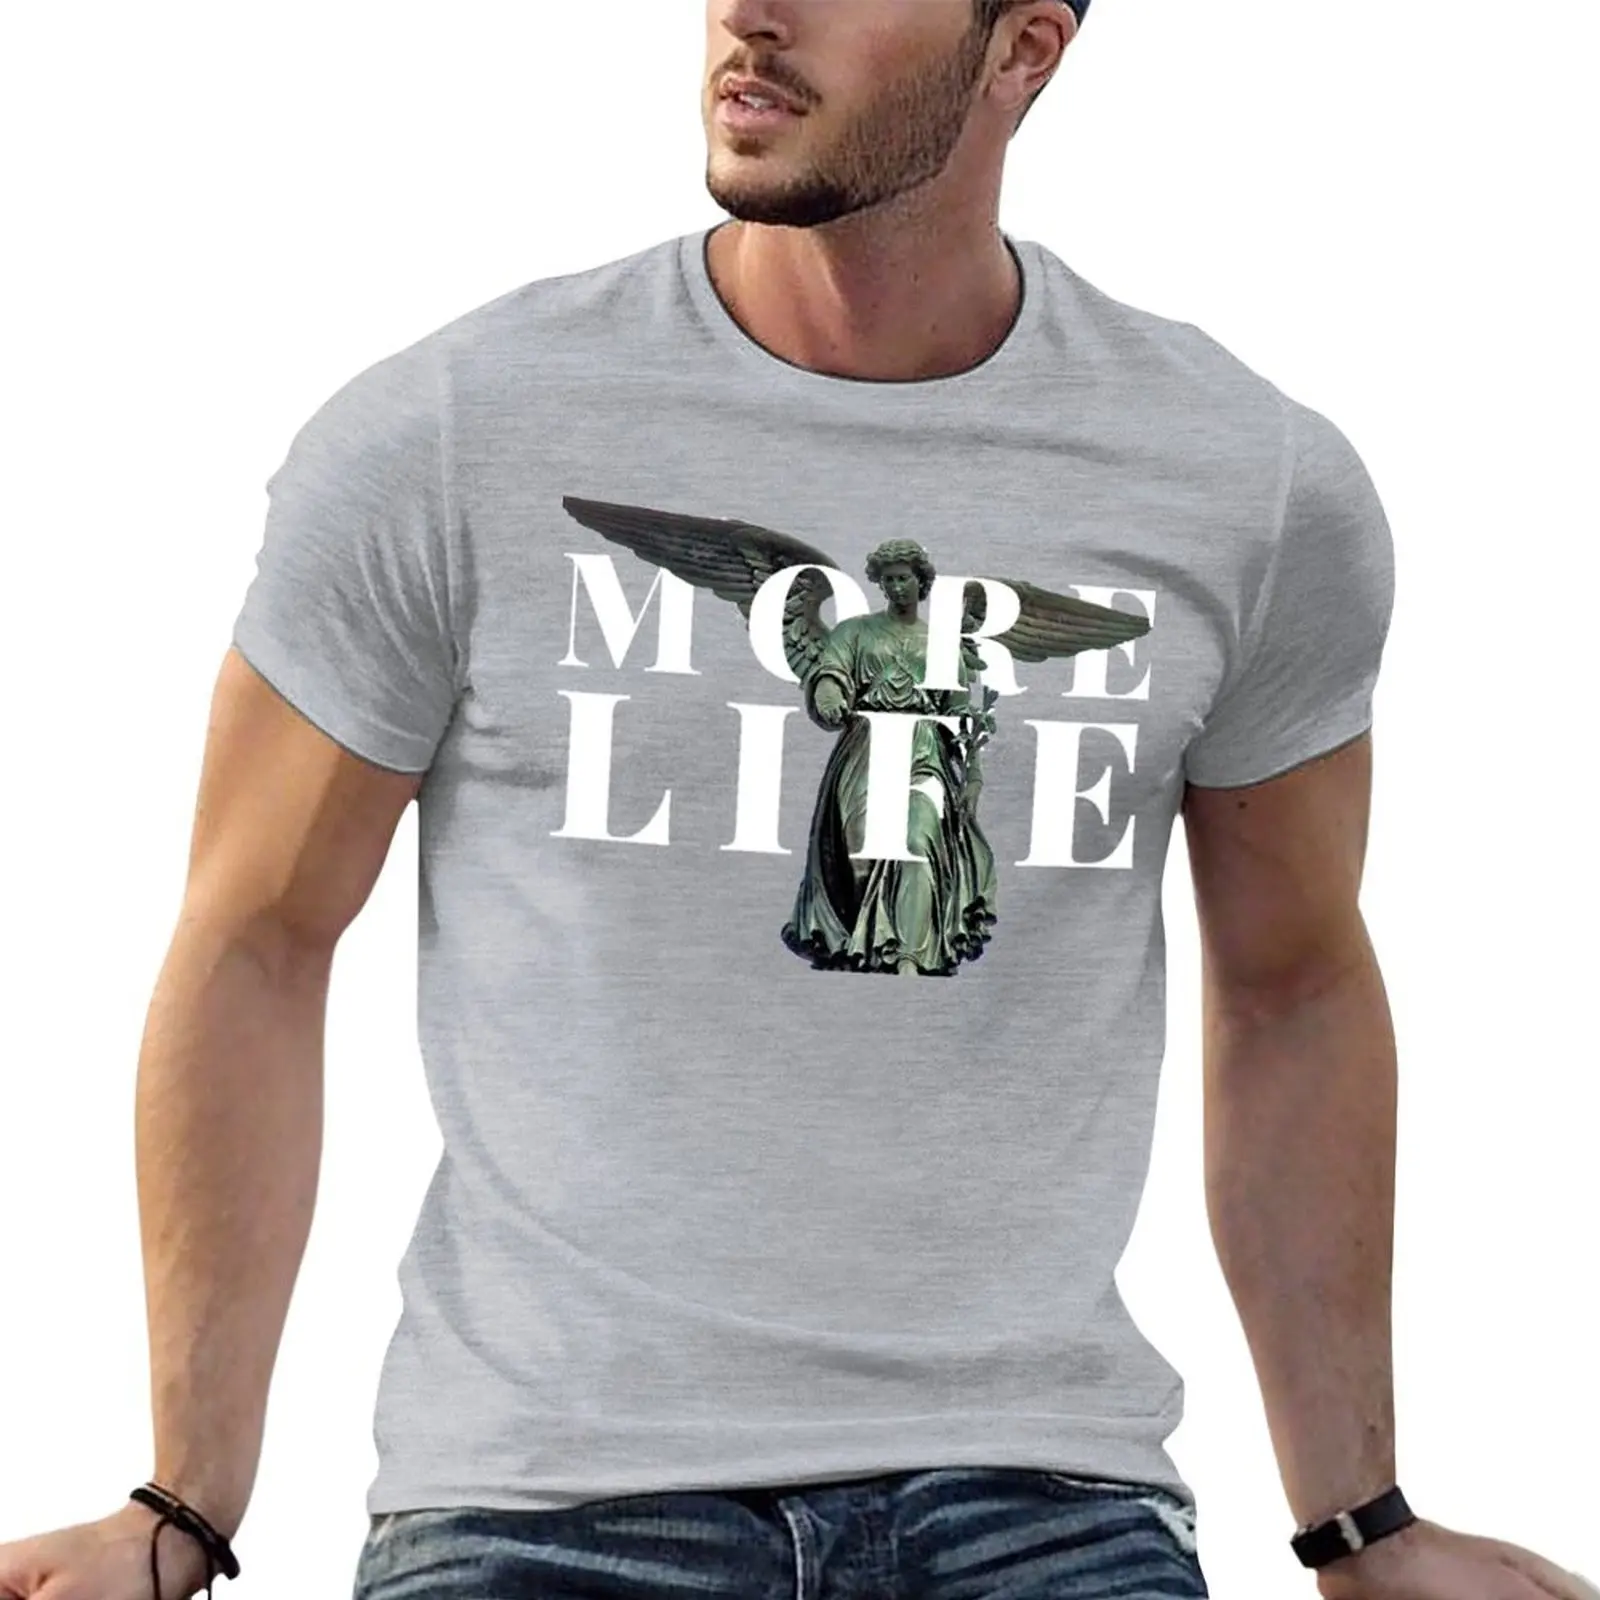 

More Life! - Angels in America T-shirt blacks hippie clothes Blouse Men's t shirts